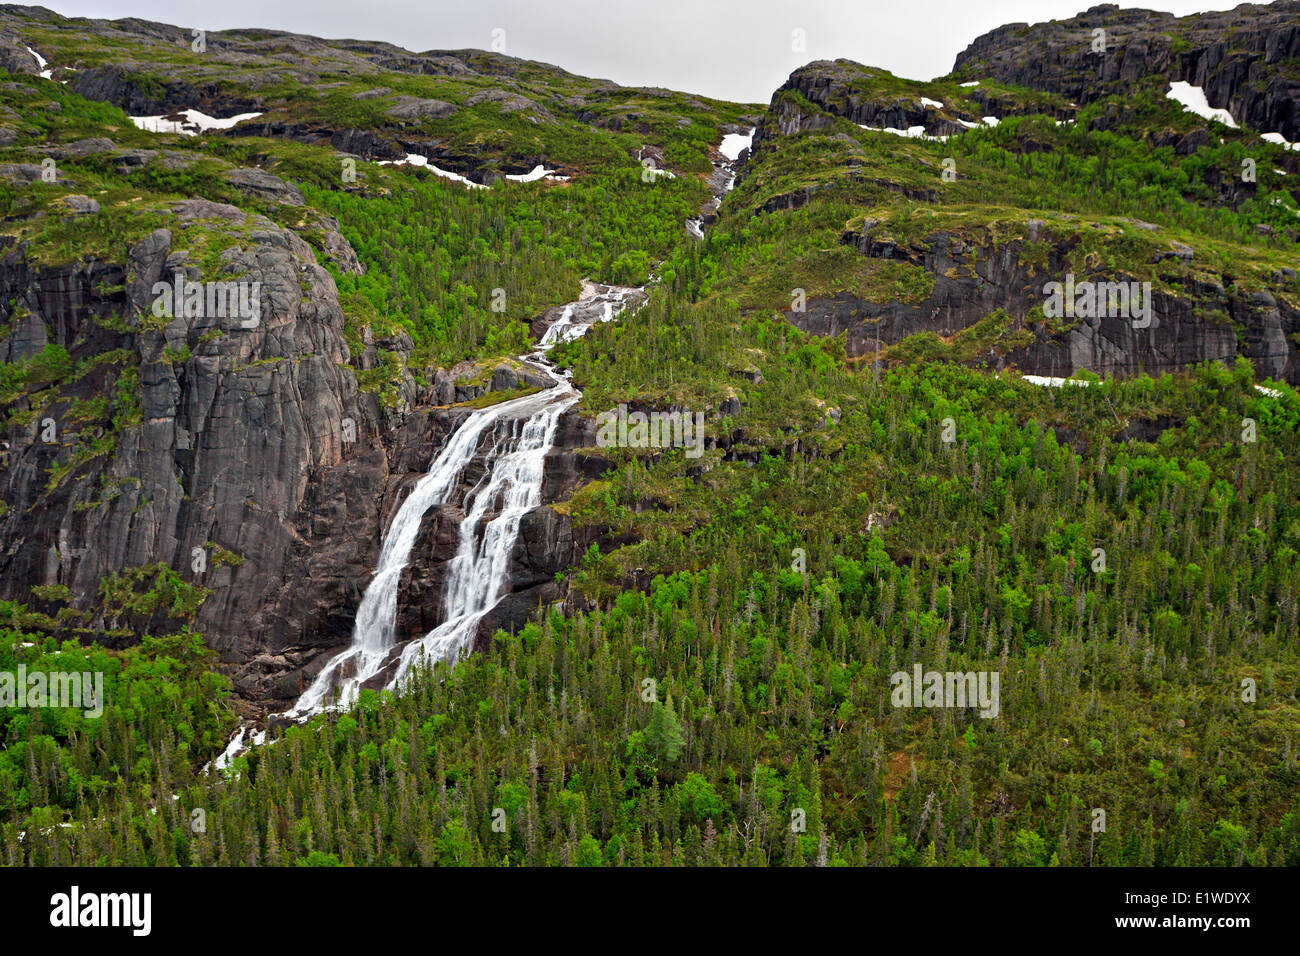 Waterfall, Tucked Away Falls (un-named), in the Mealy Mountains, Southern Labrador, Newfoundland and Labrador, Canada. Stock Photo